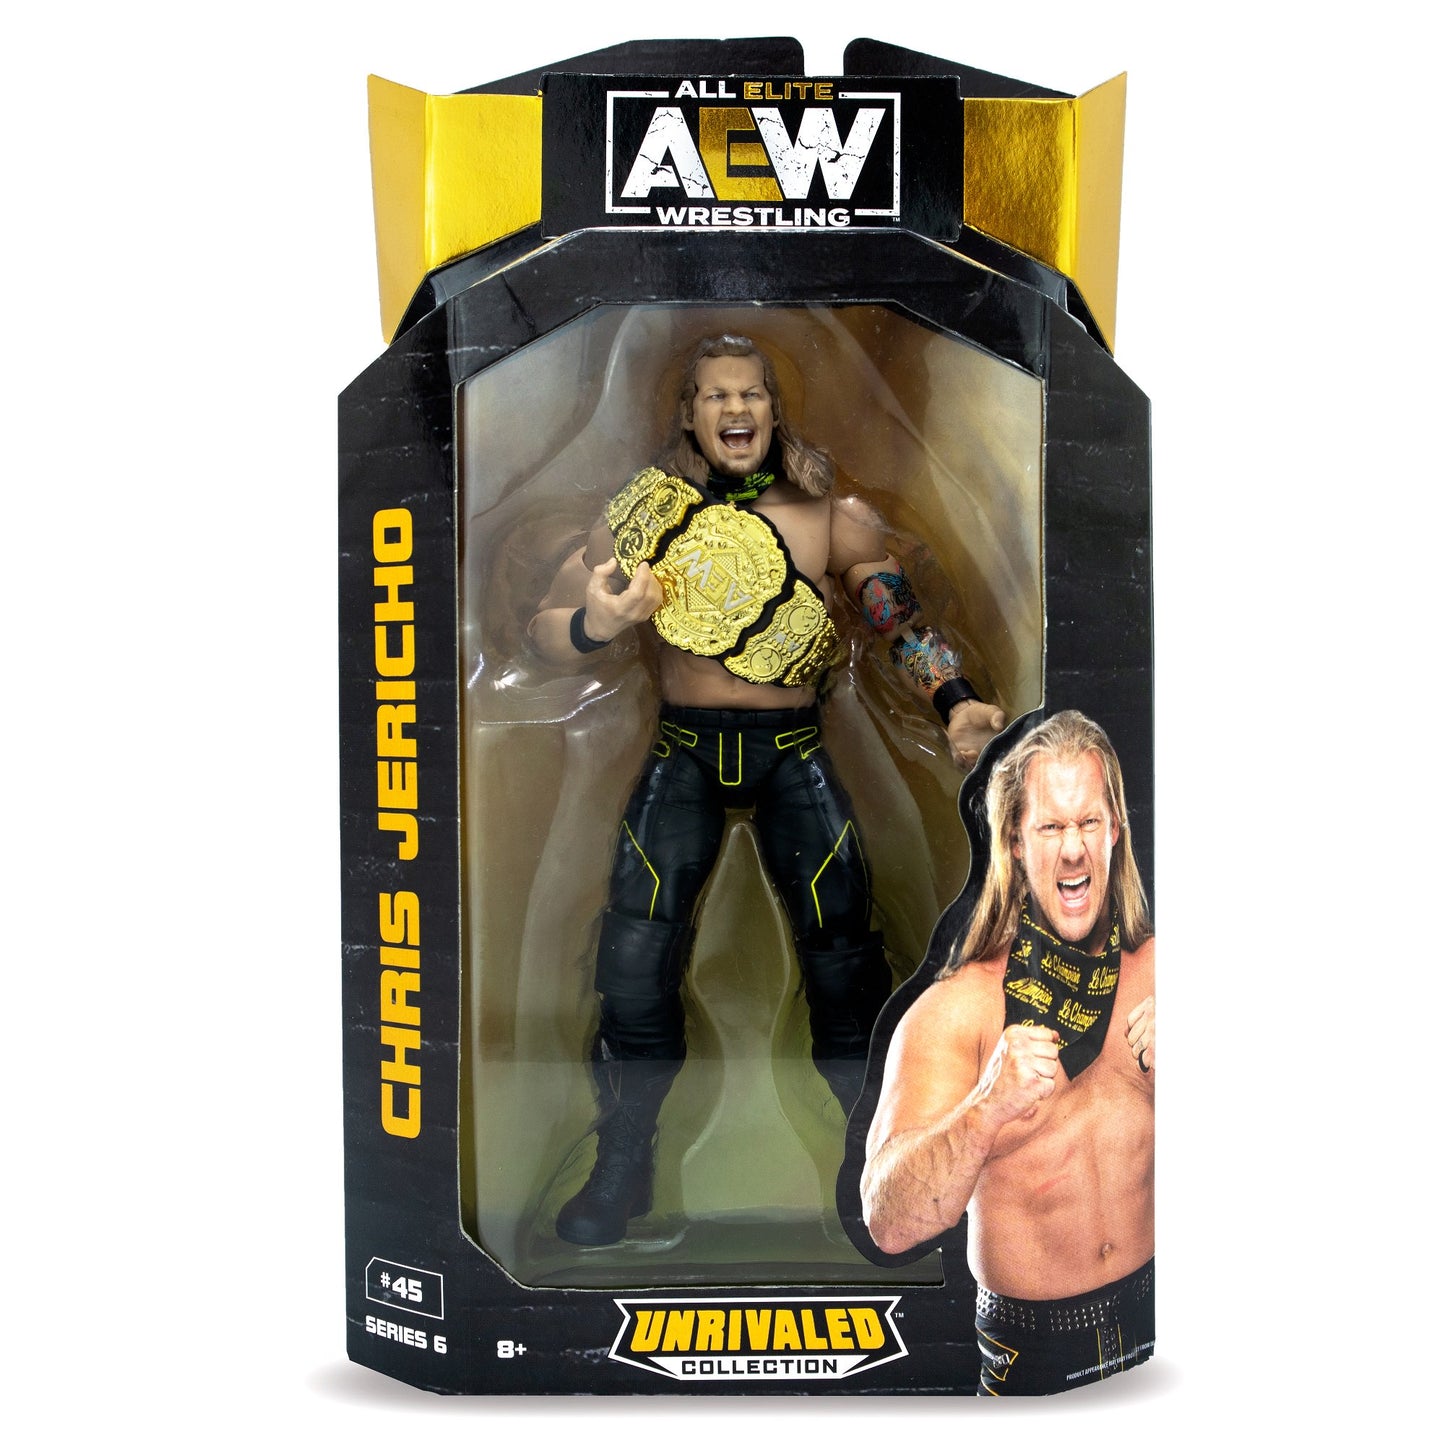 AEW Jazwares Unrivaled Collection 6 #45 Chris Jericho